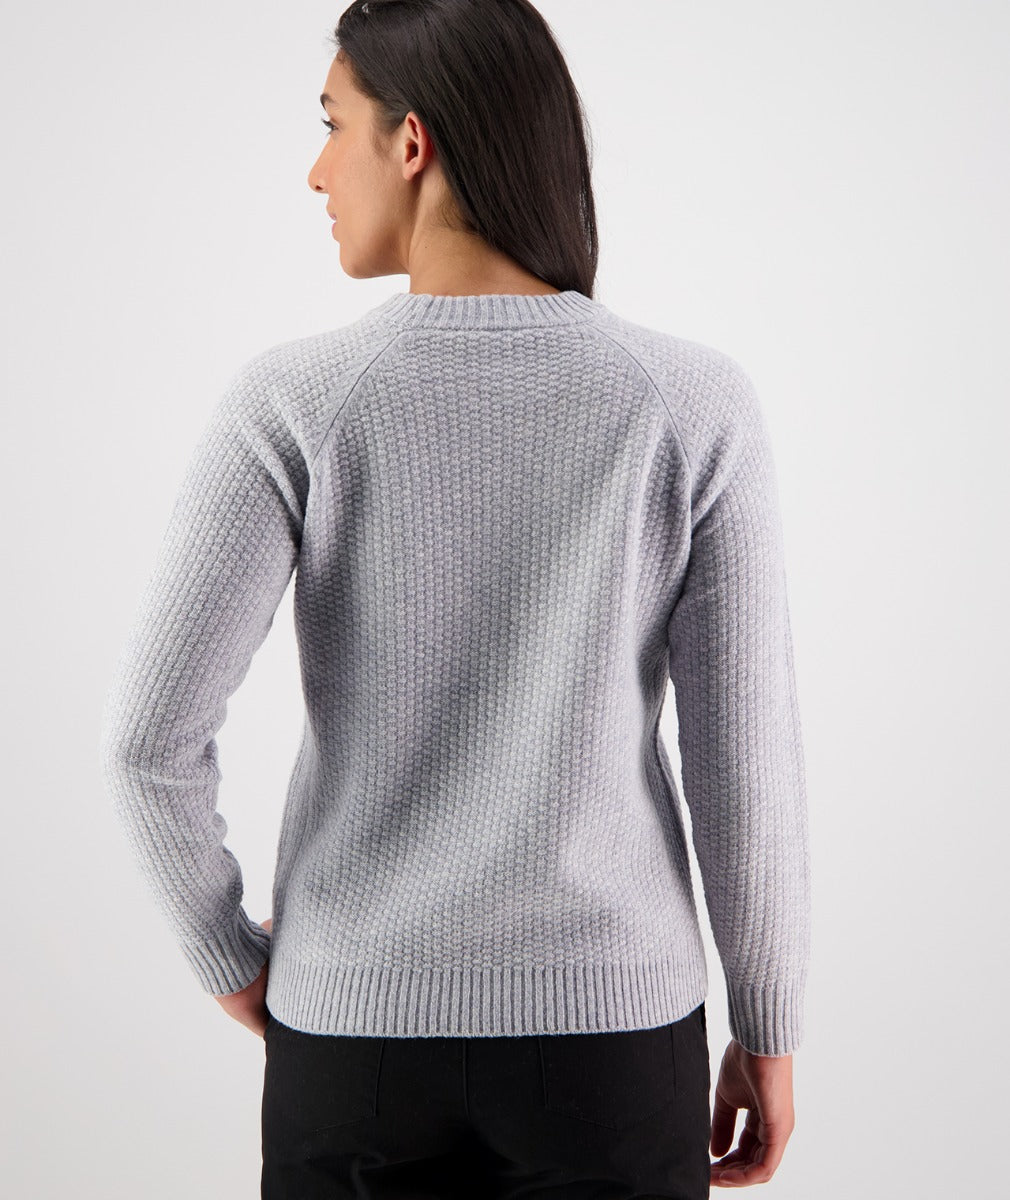 Swanndri Womens Kennedy point Cable Knit Crew - Grey